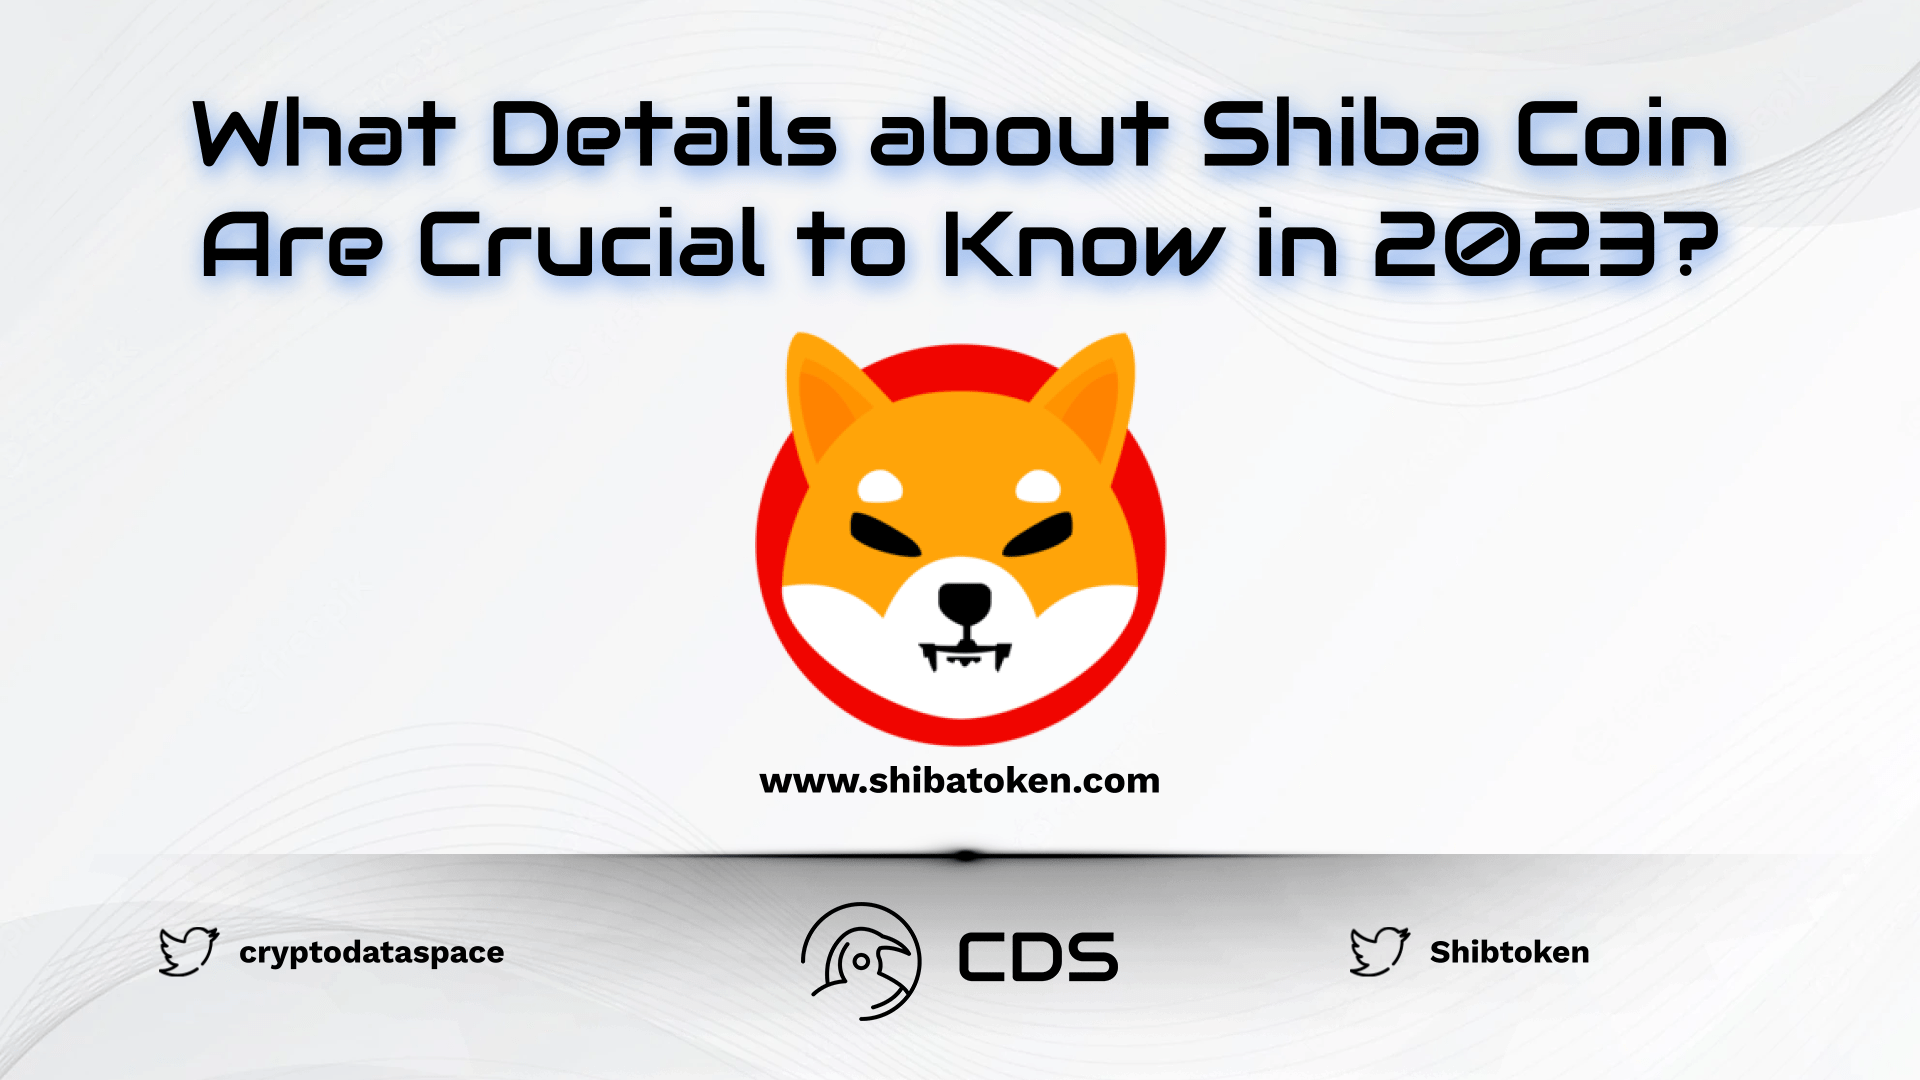 What Details about Shiba Coin Are Crucial to Know in 2023